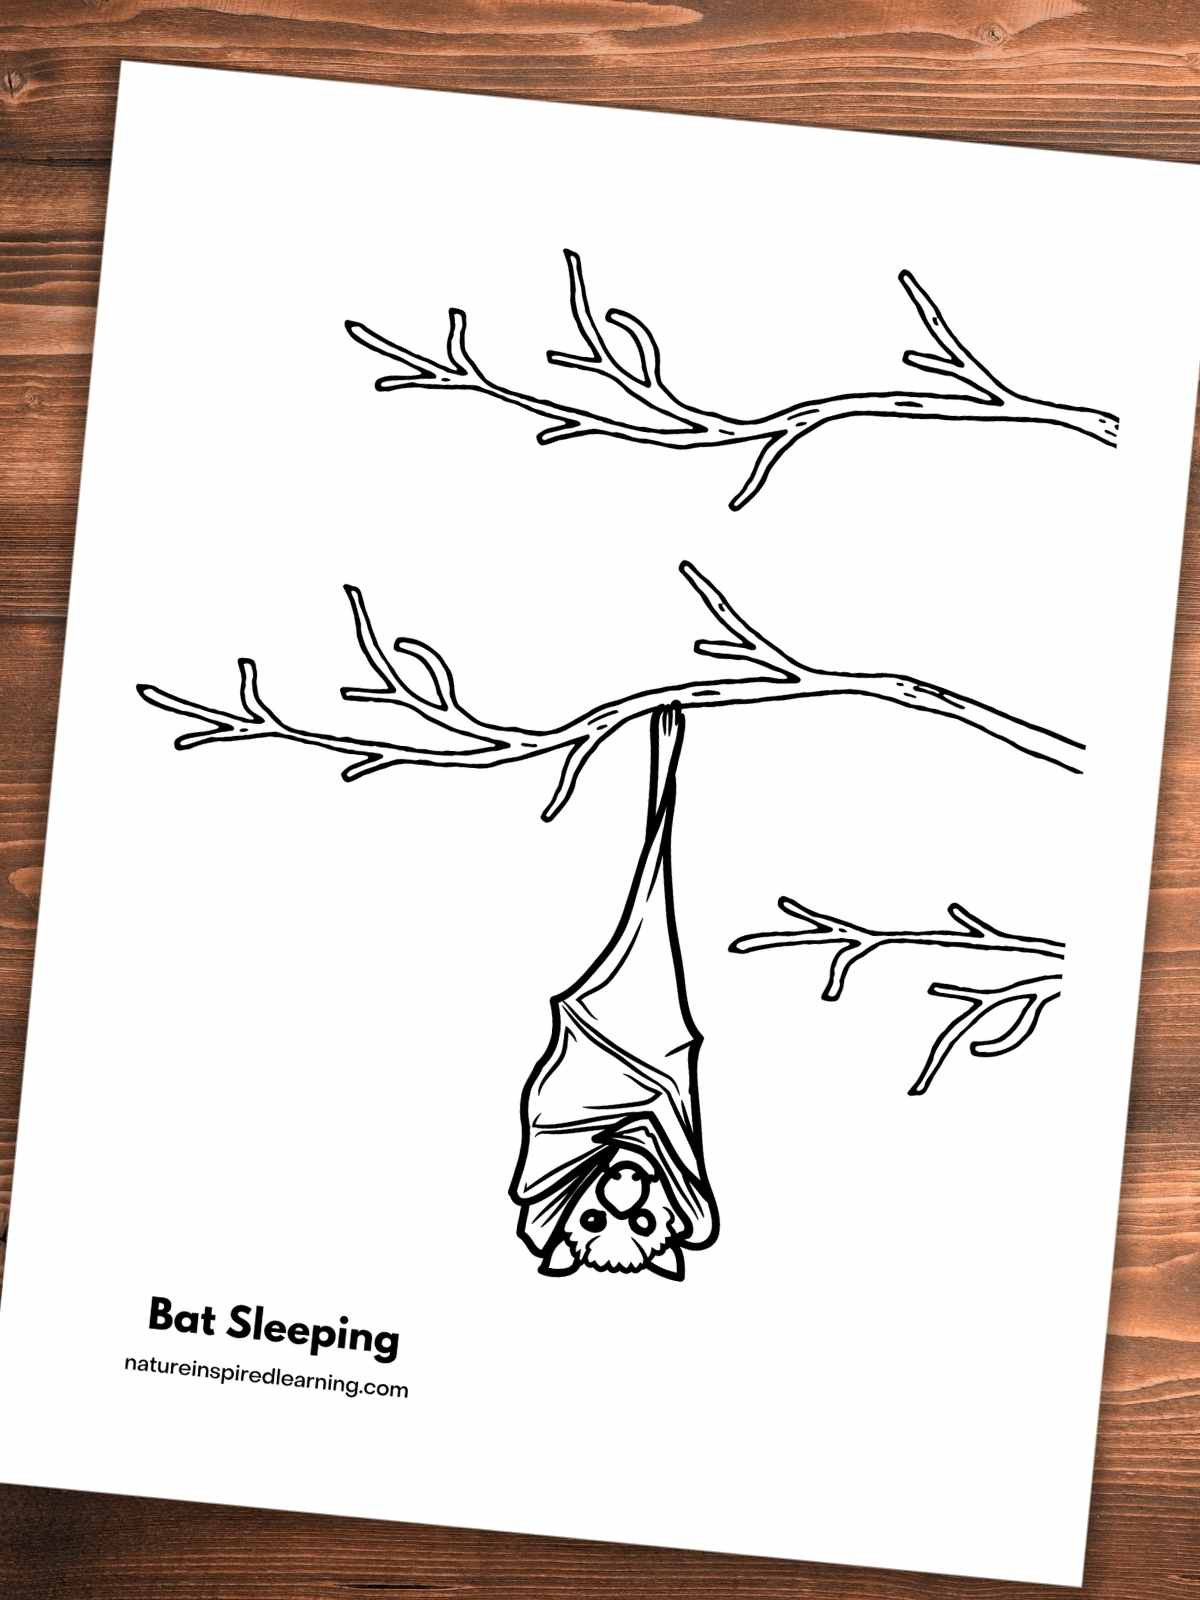 black and white printable with bare tree branches with one bat hanging upside down from a branch. Coloring sheet slanted on a wooden background